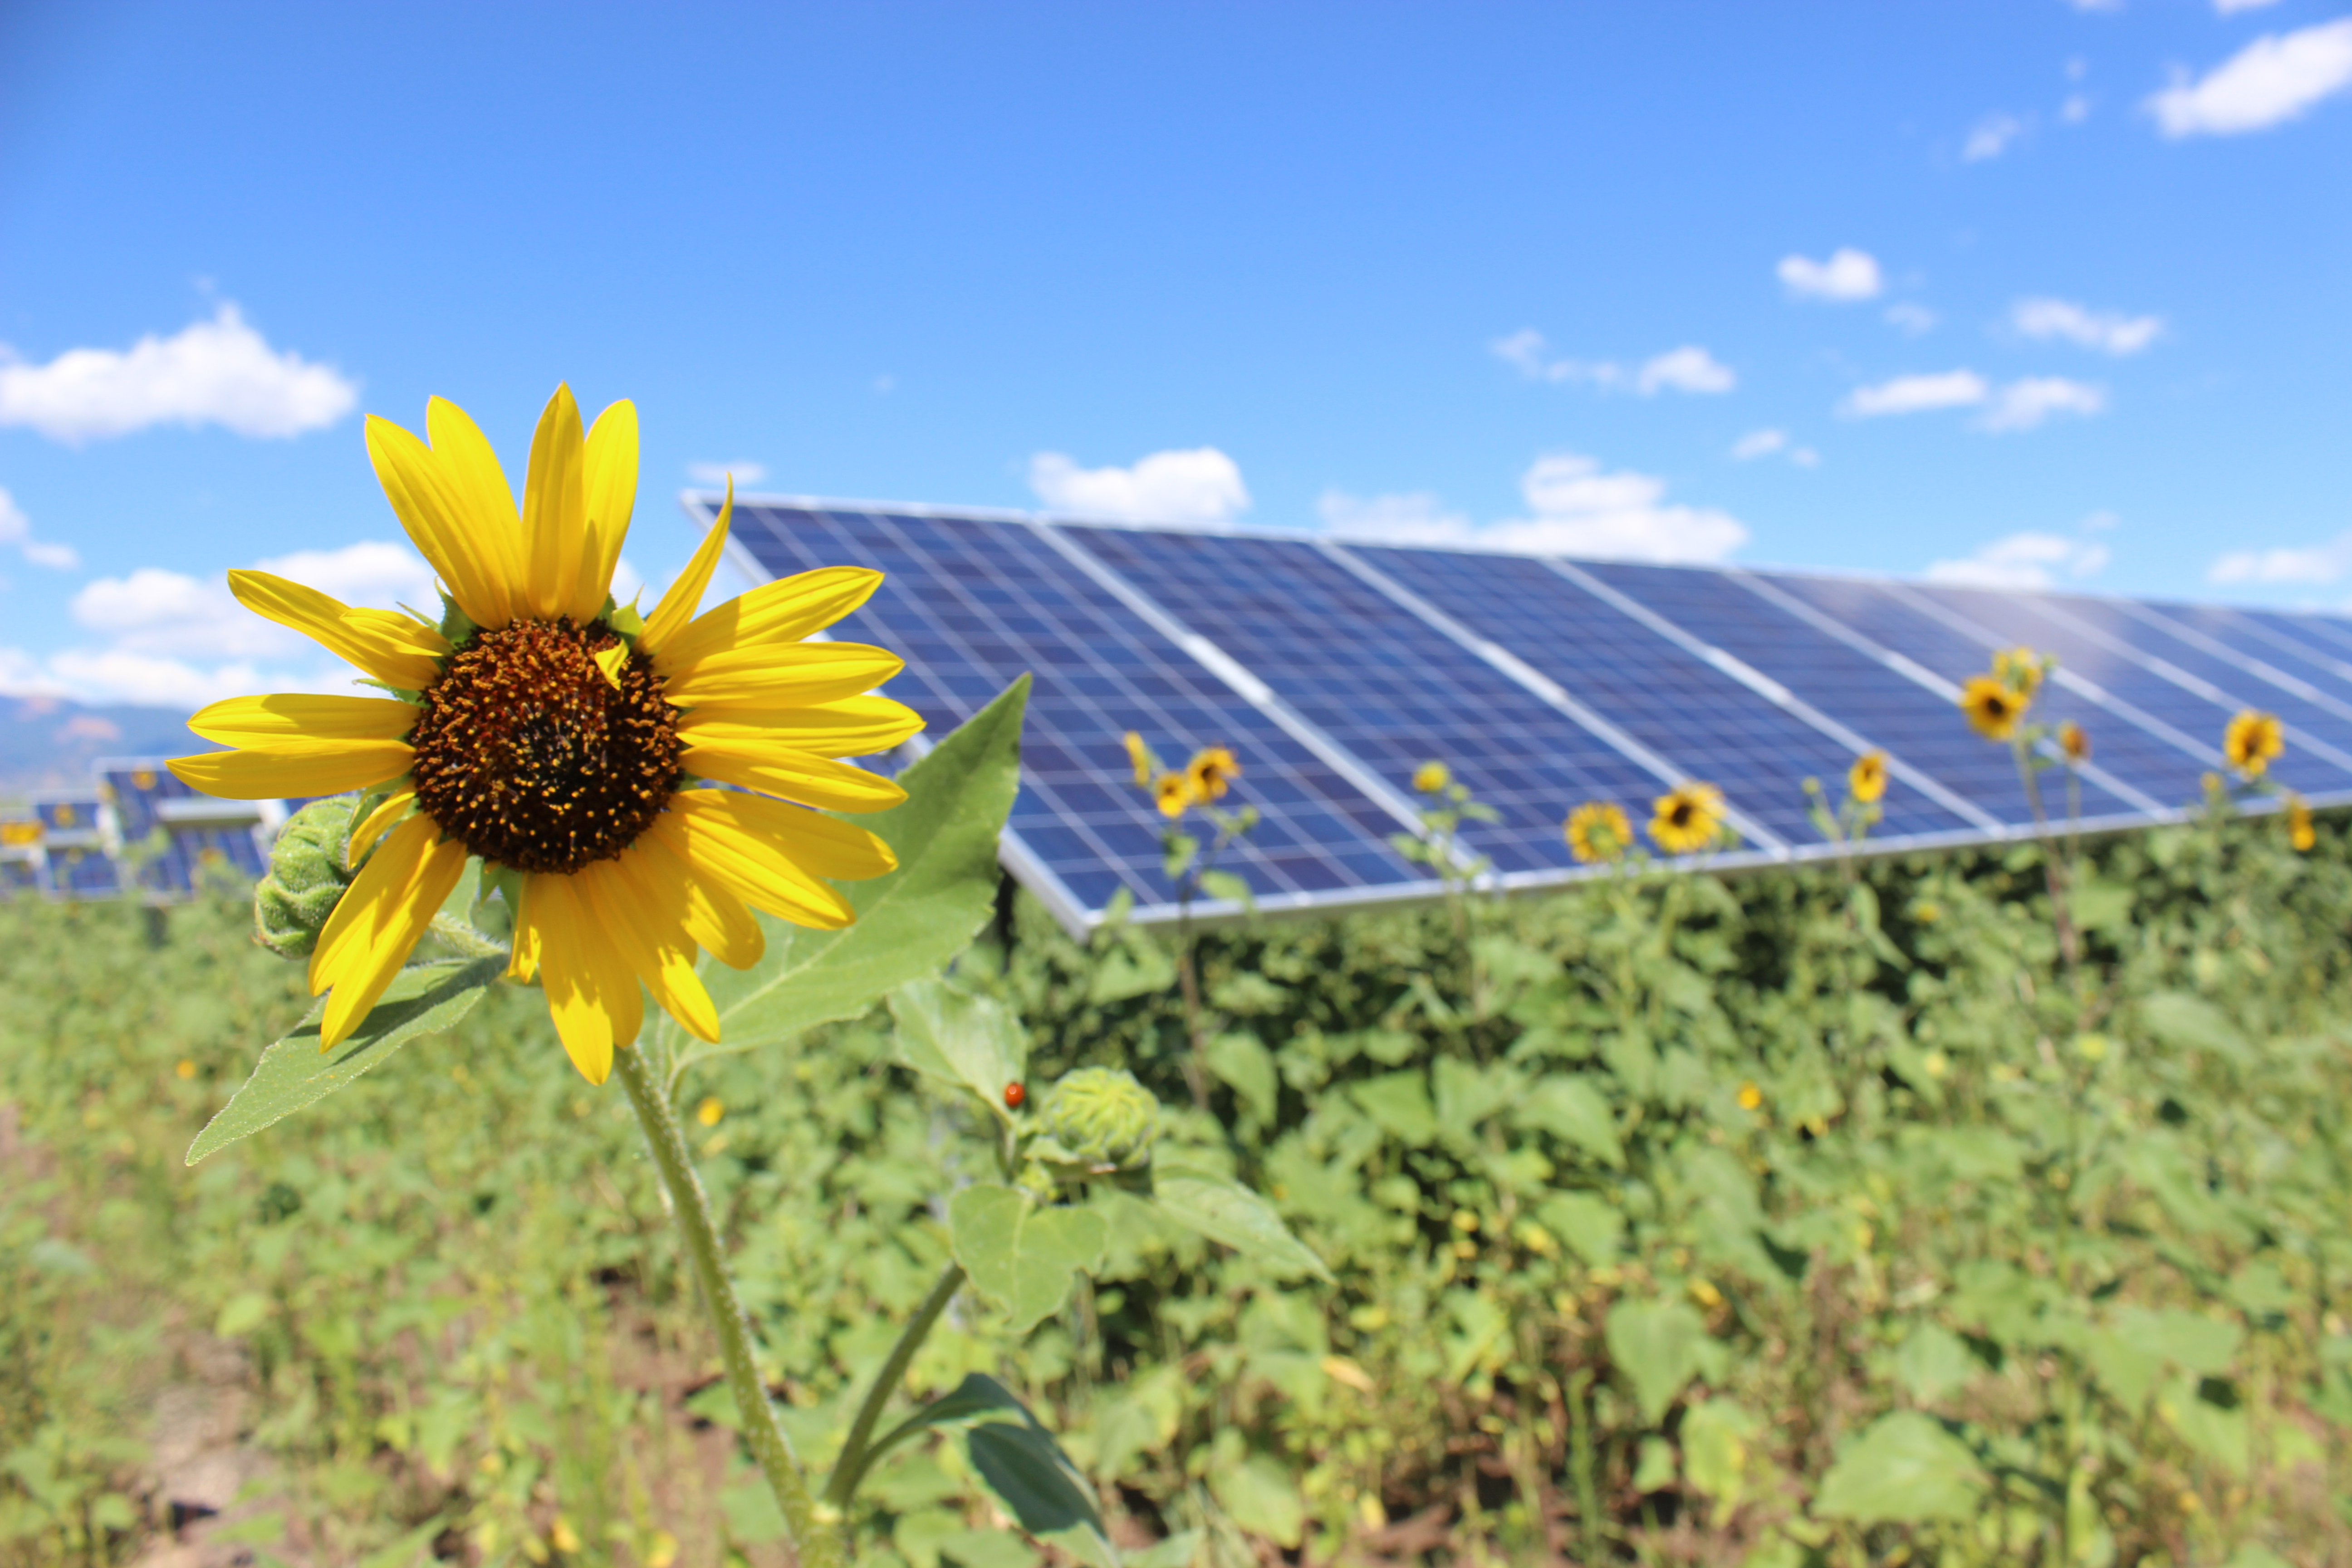 a row of solar panels and sunflowers